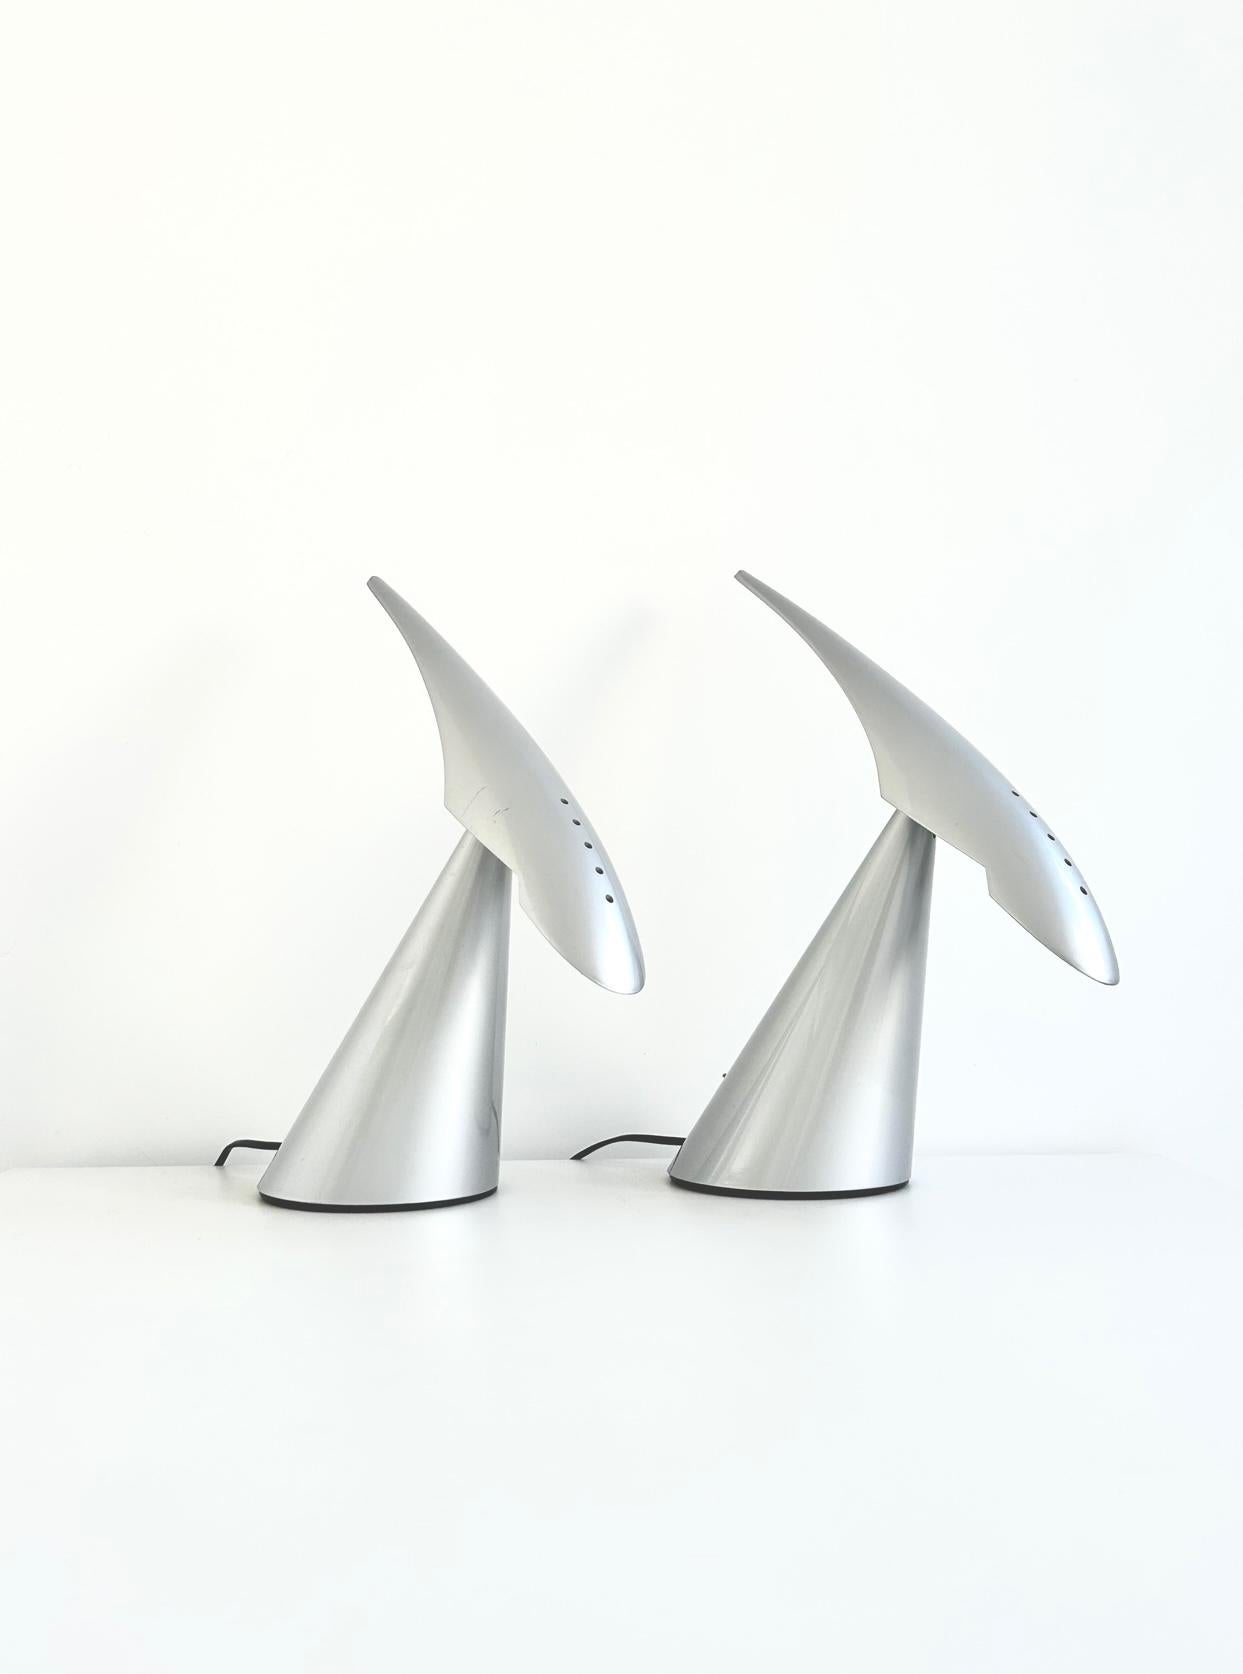 Pair of Ran Desk Lamps, Peter Naumann, ClassiCon, 1990s In Good Condition For Sale In PARIS, FR